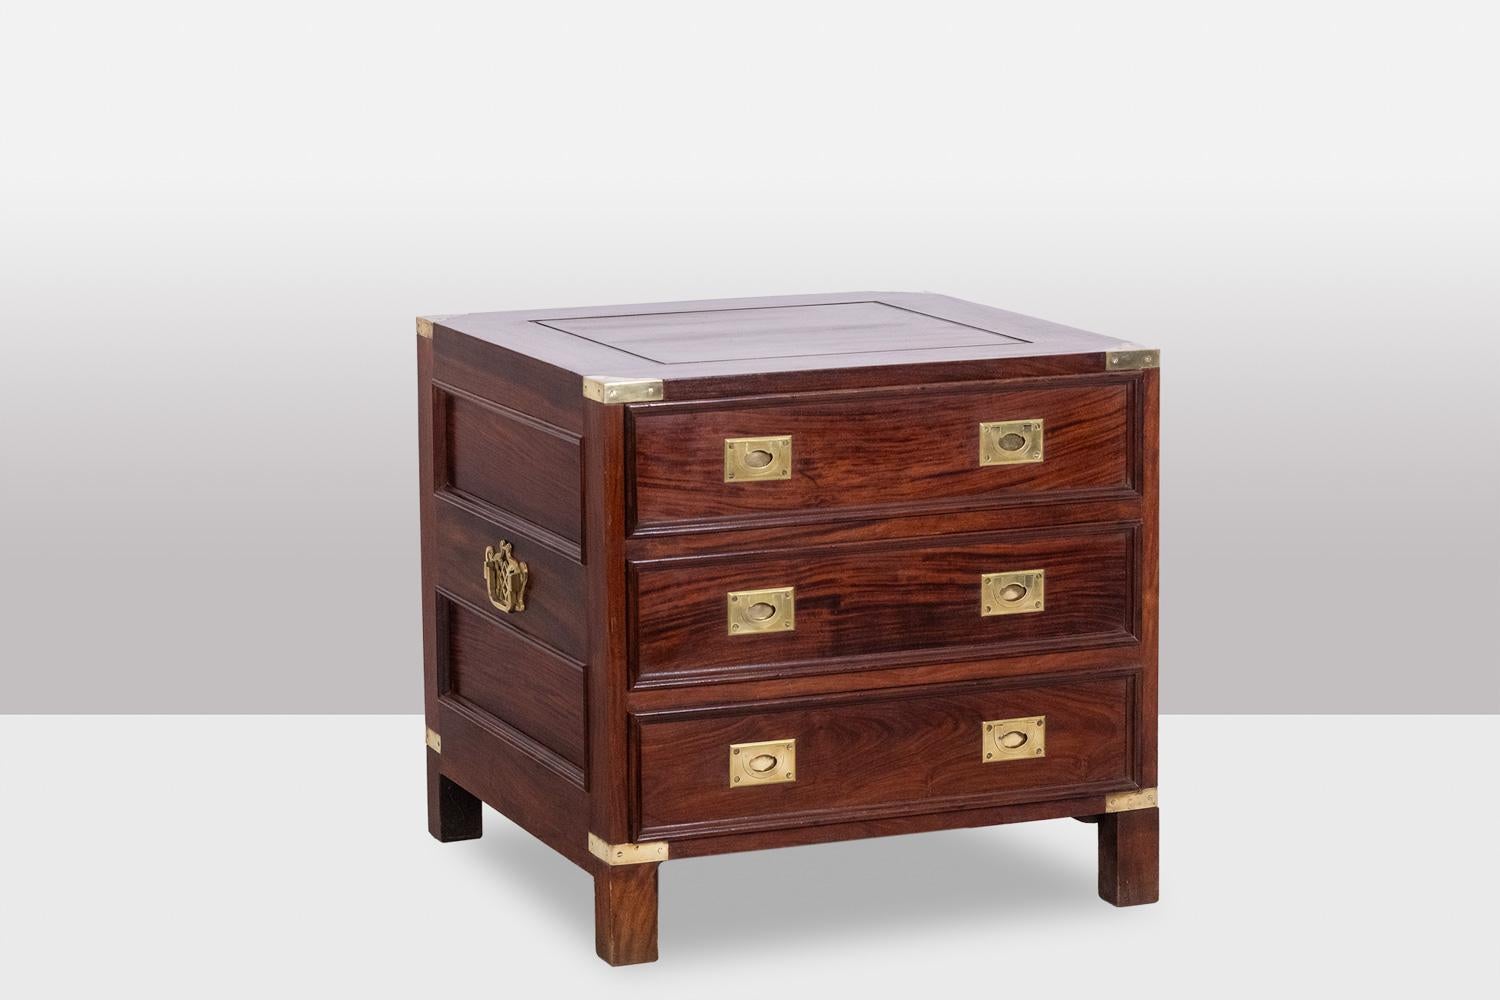 Pair of mahogany marine chests of drawers, opening with two drawers on the front. Handles and spandrels in gilded brass.

English work realized in the 1950s.

Dimensions: H 59 x W 61 x D 61 cm